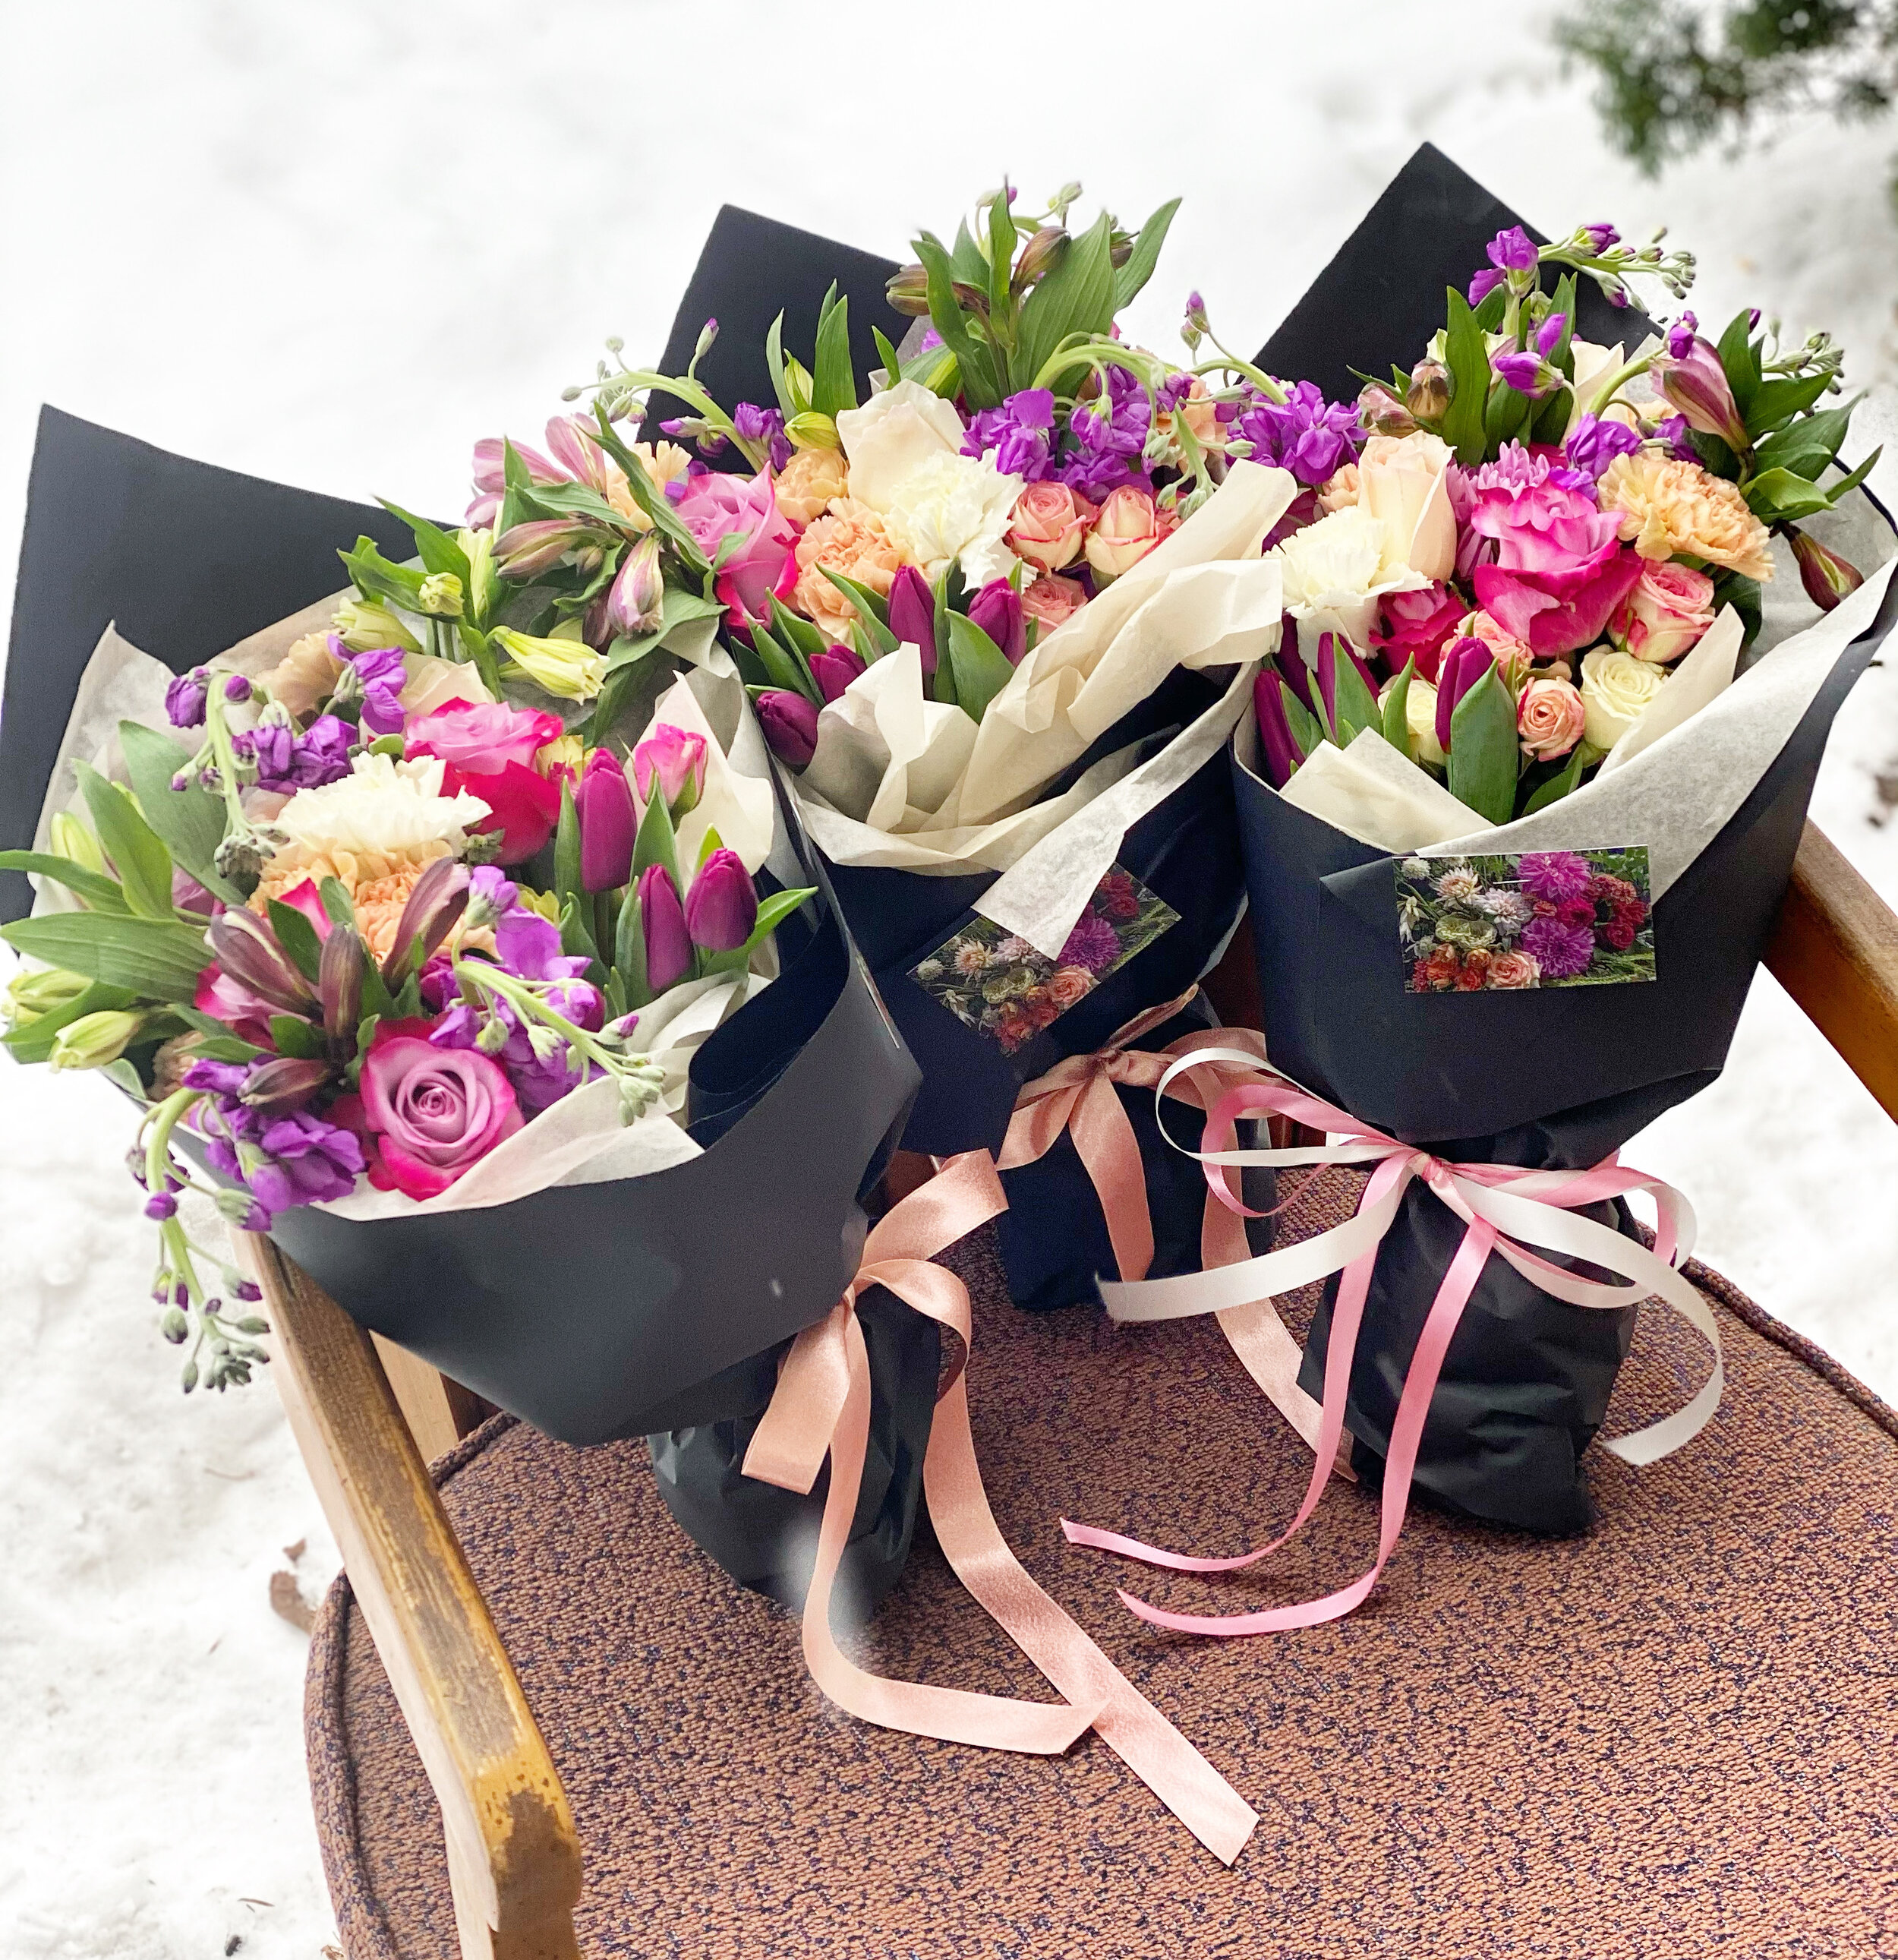 The Best Flower Delivery Services to Woo Your Valentine in 2022   PEOPLE.com